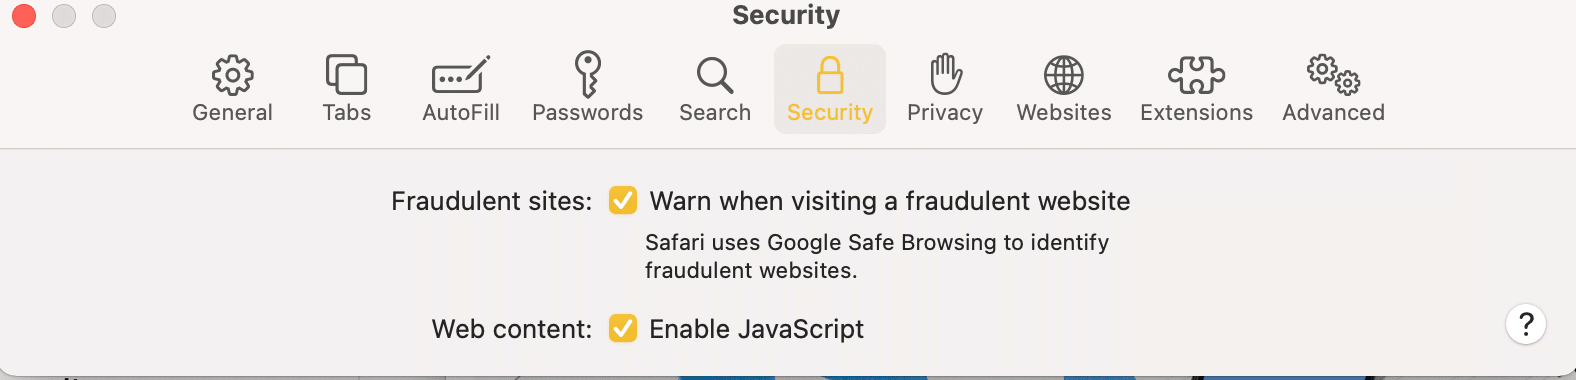 Turn the toggle ON for Warn when visiting a fraudulent website